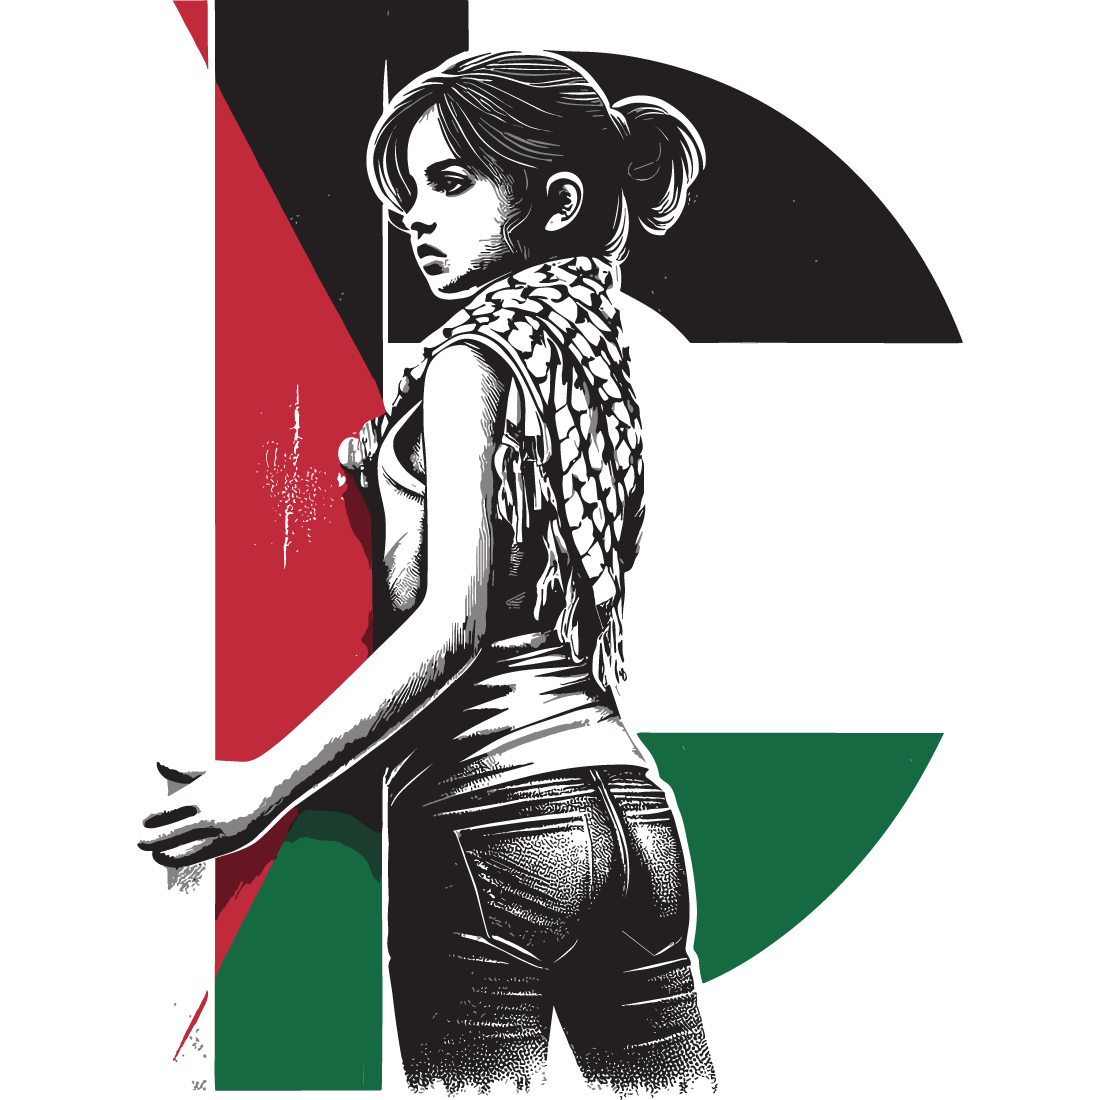 A Palestine girls t-shirt depicting the suffering and struggle of with letter or flag on white background cover image.